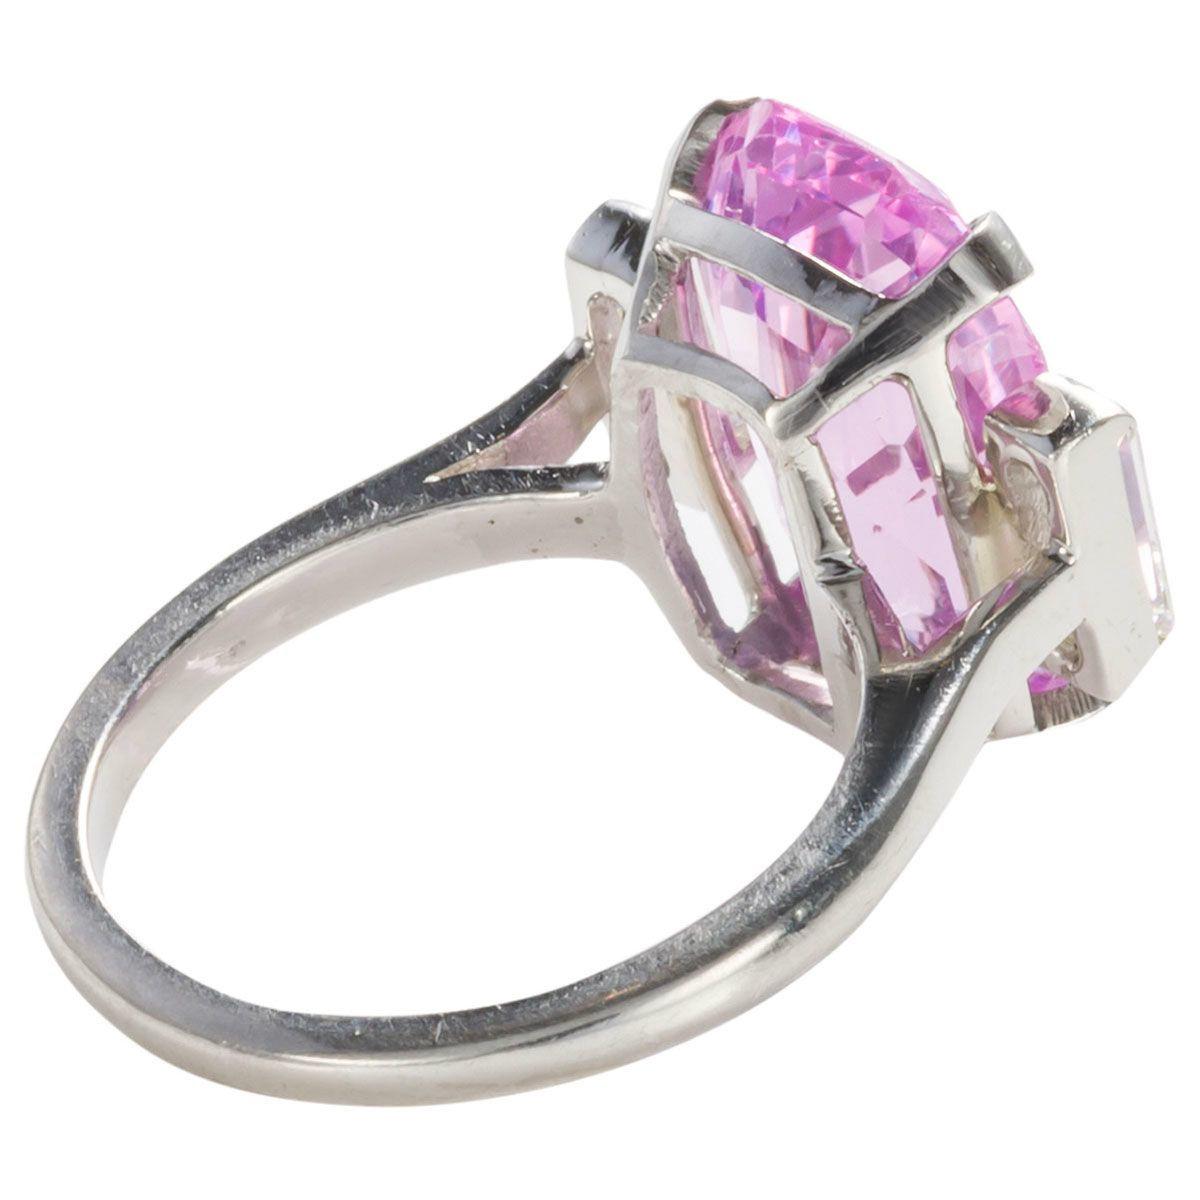 Emerald Cut 8.27 Carat Unheated Certified Pink Ceylon Sapphire and Baguette Cut Diamond Ring For Sale